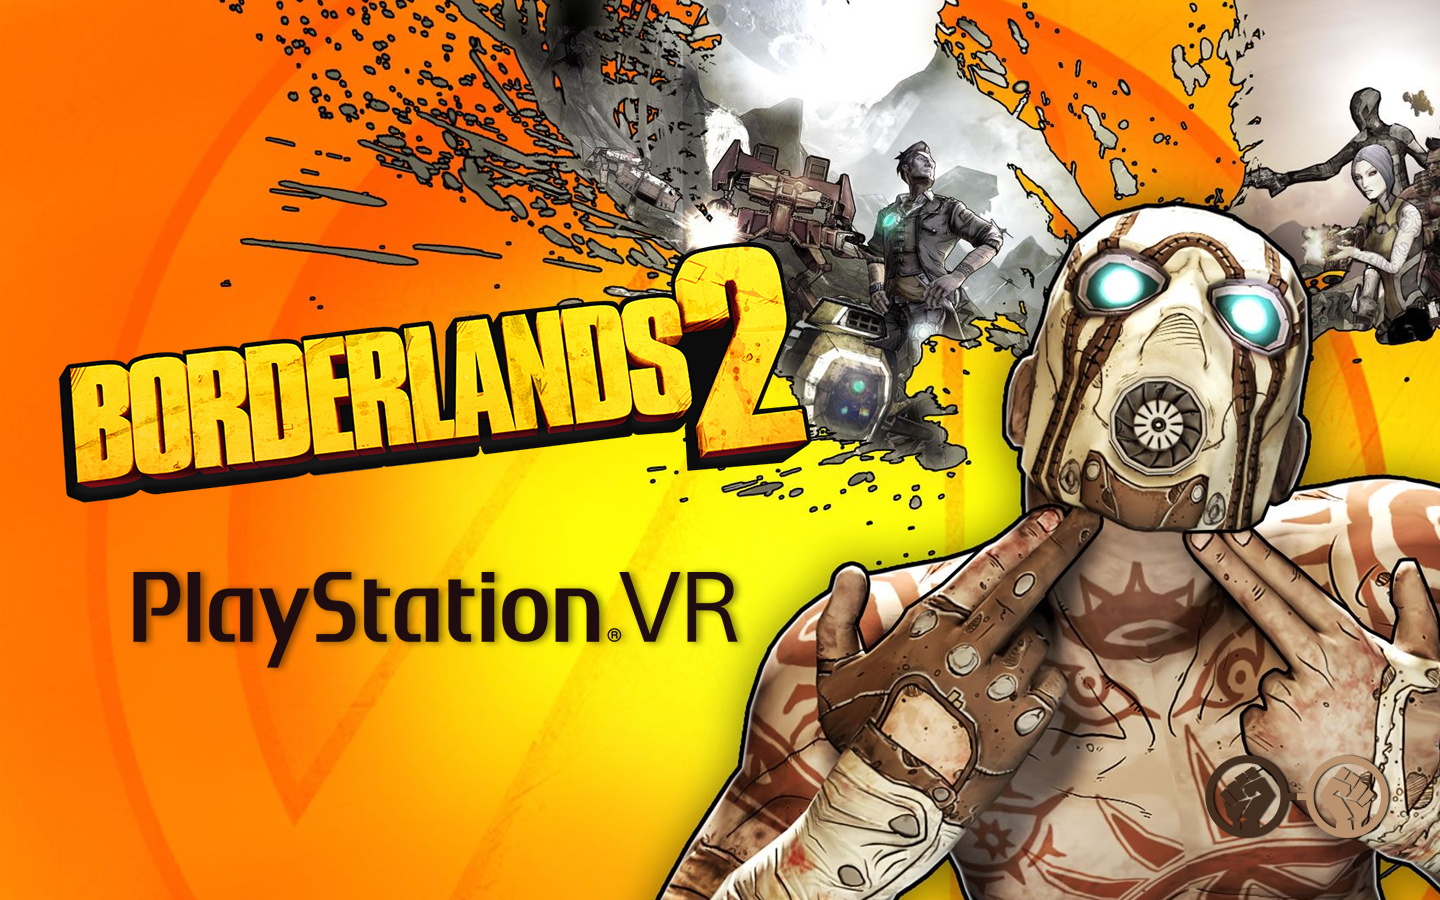 ‘Borderlands 2’ Will Be Made Playable on PlayStation VR